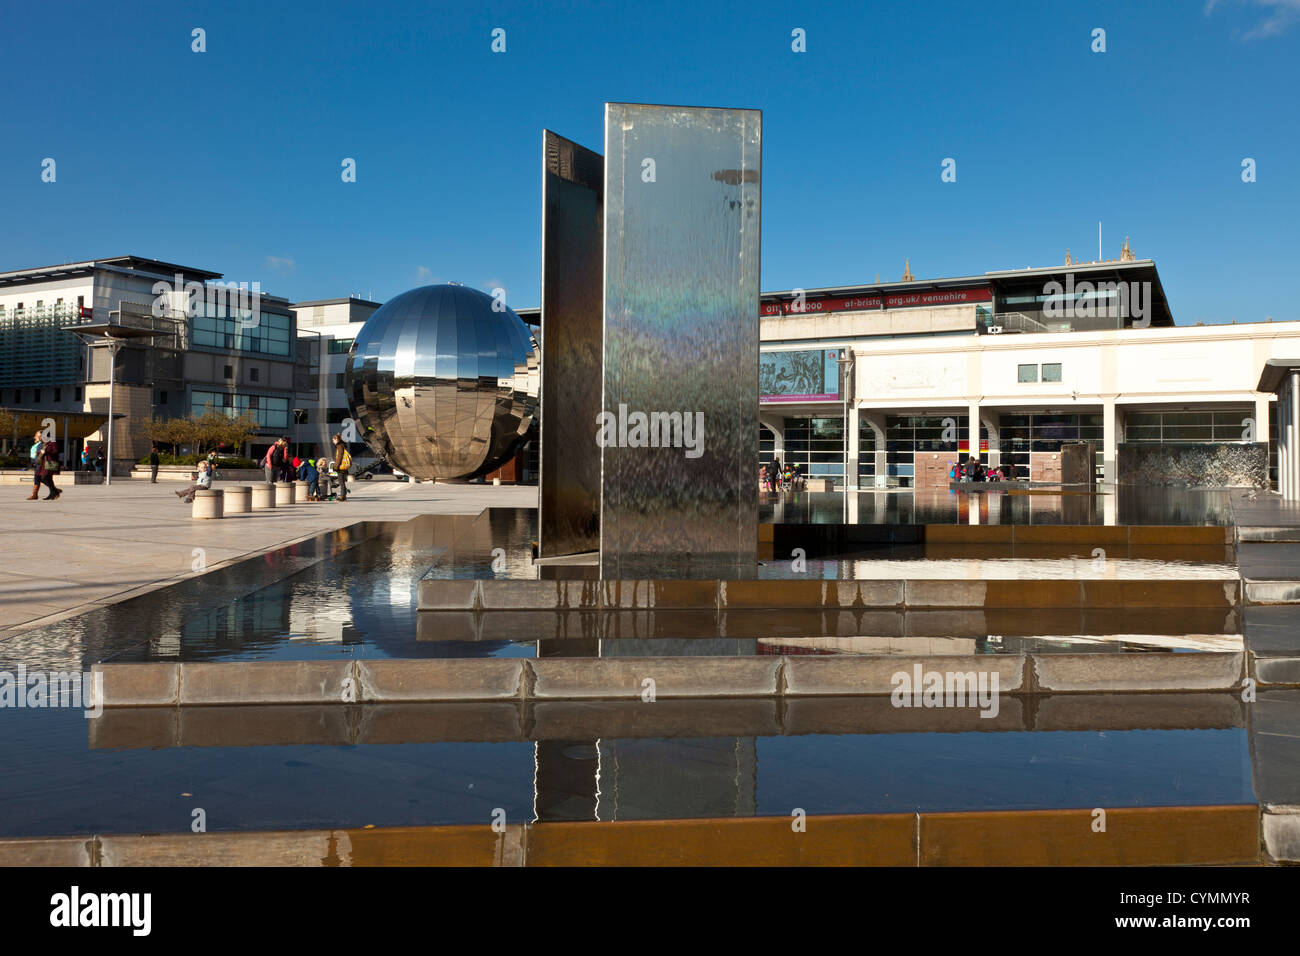 Modern trendy funky stainless steel public space art, sculptures & water features in Millennium Square Bristol England UK. Stock Photo